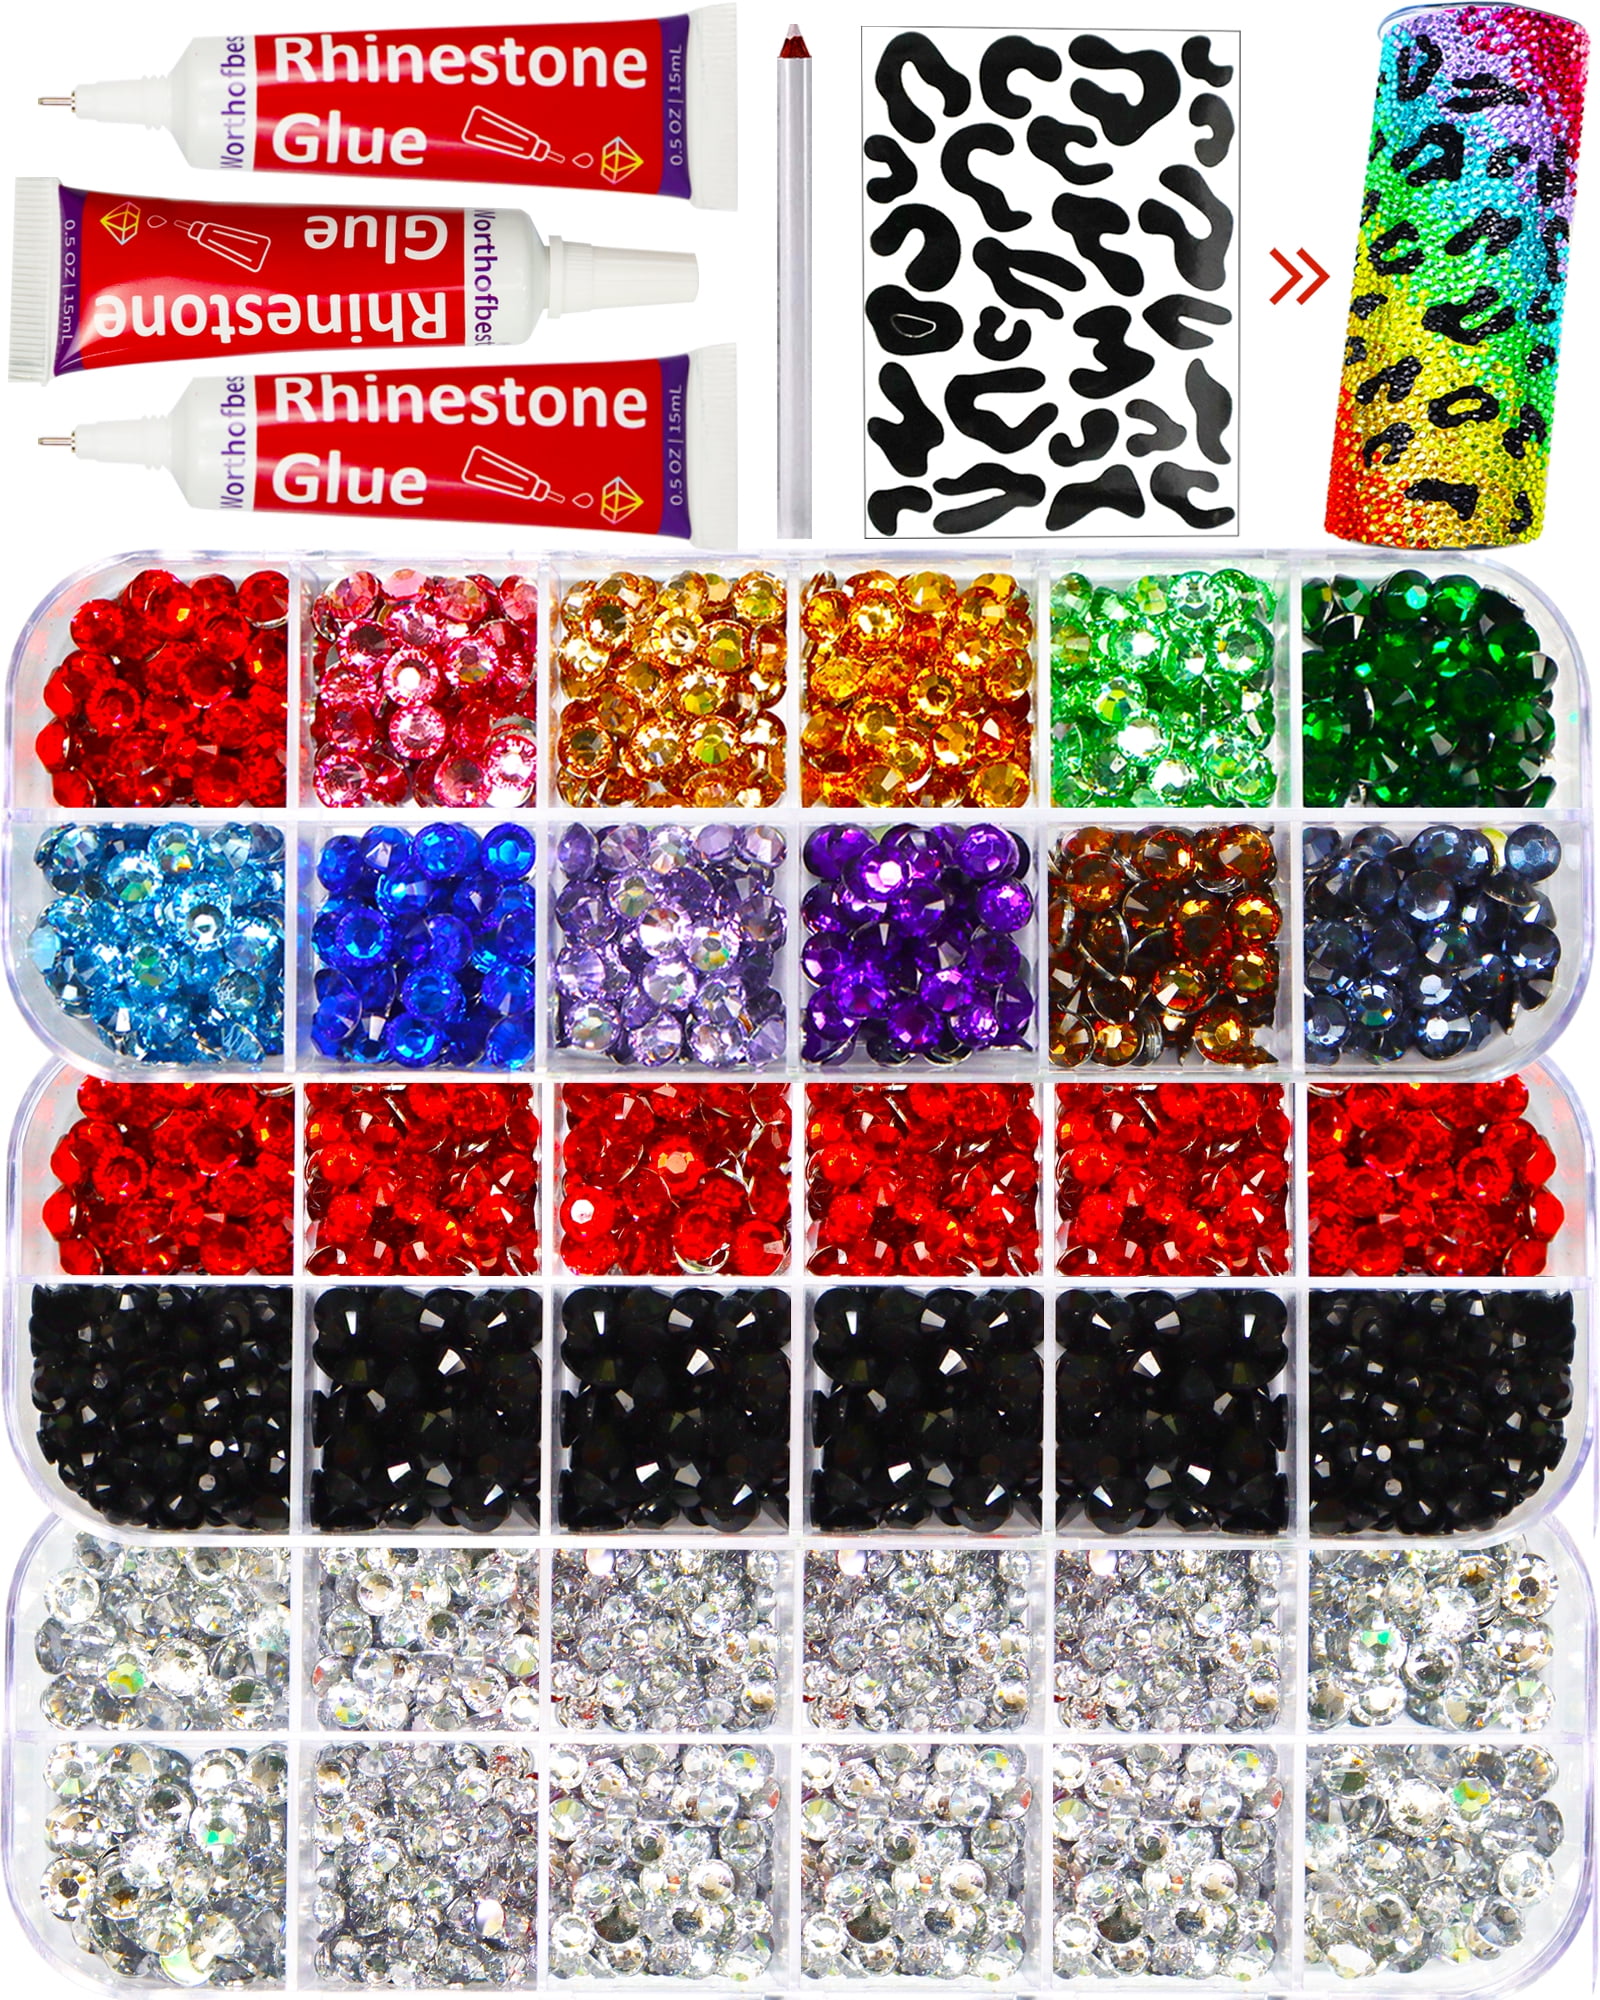 Worthofbest Rhinestones with Craft Glue for Crafts, Flat Back Gems Crystals - Mixed Colors, Size: Small